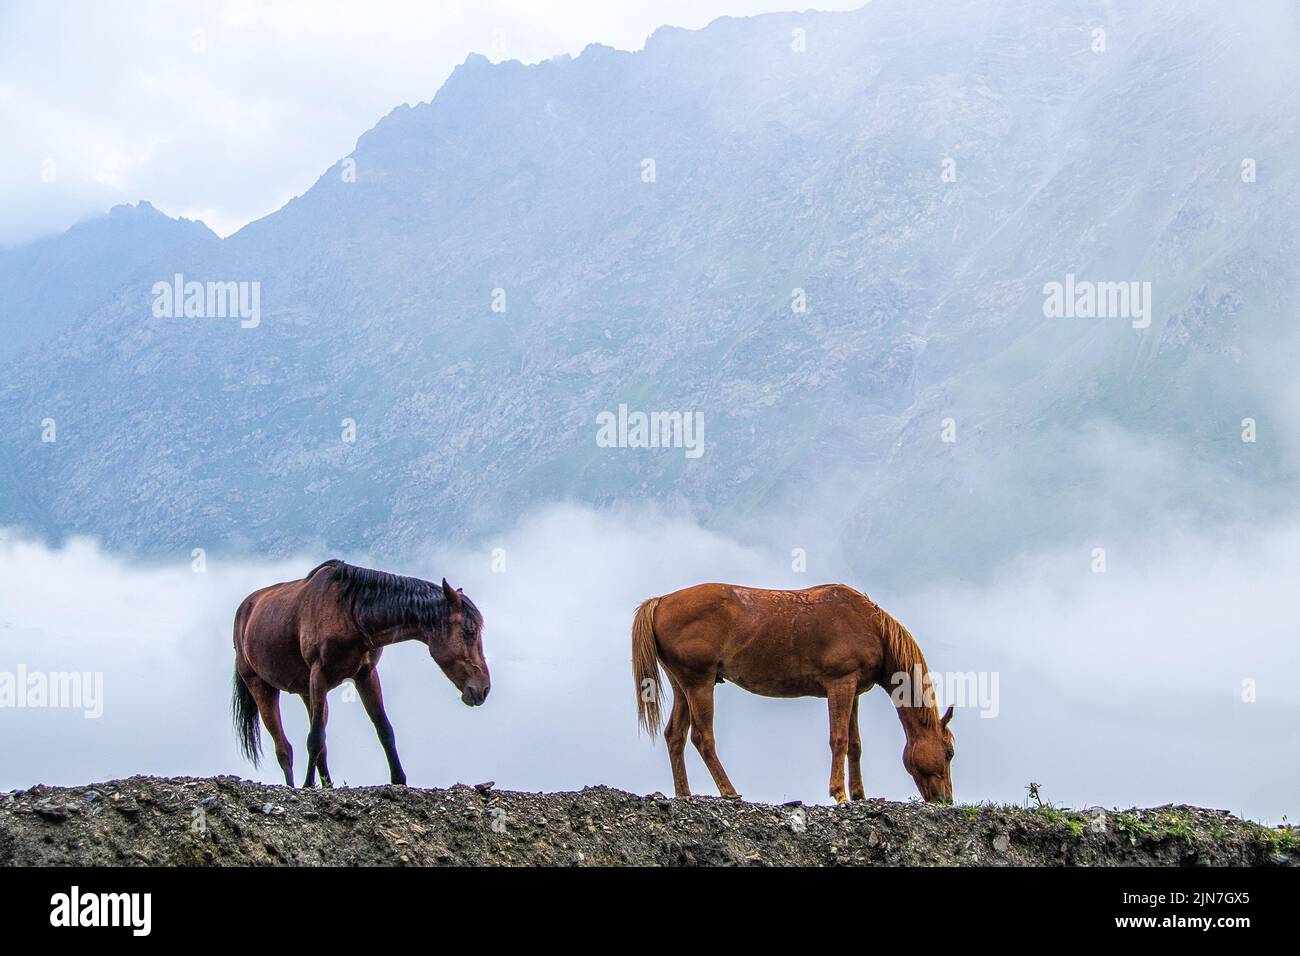 Two horses grazing in Caucuses mountains of Georgia - a few miles from Russian border with mountains shrouded in fog behind them Stock Photo